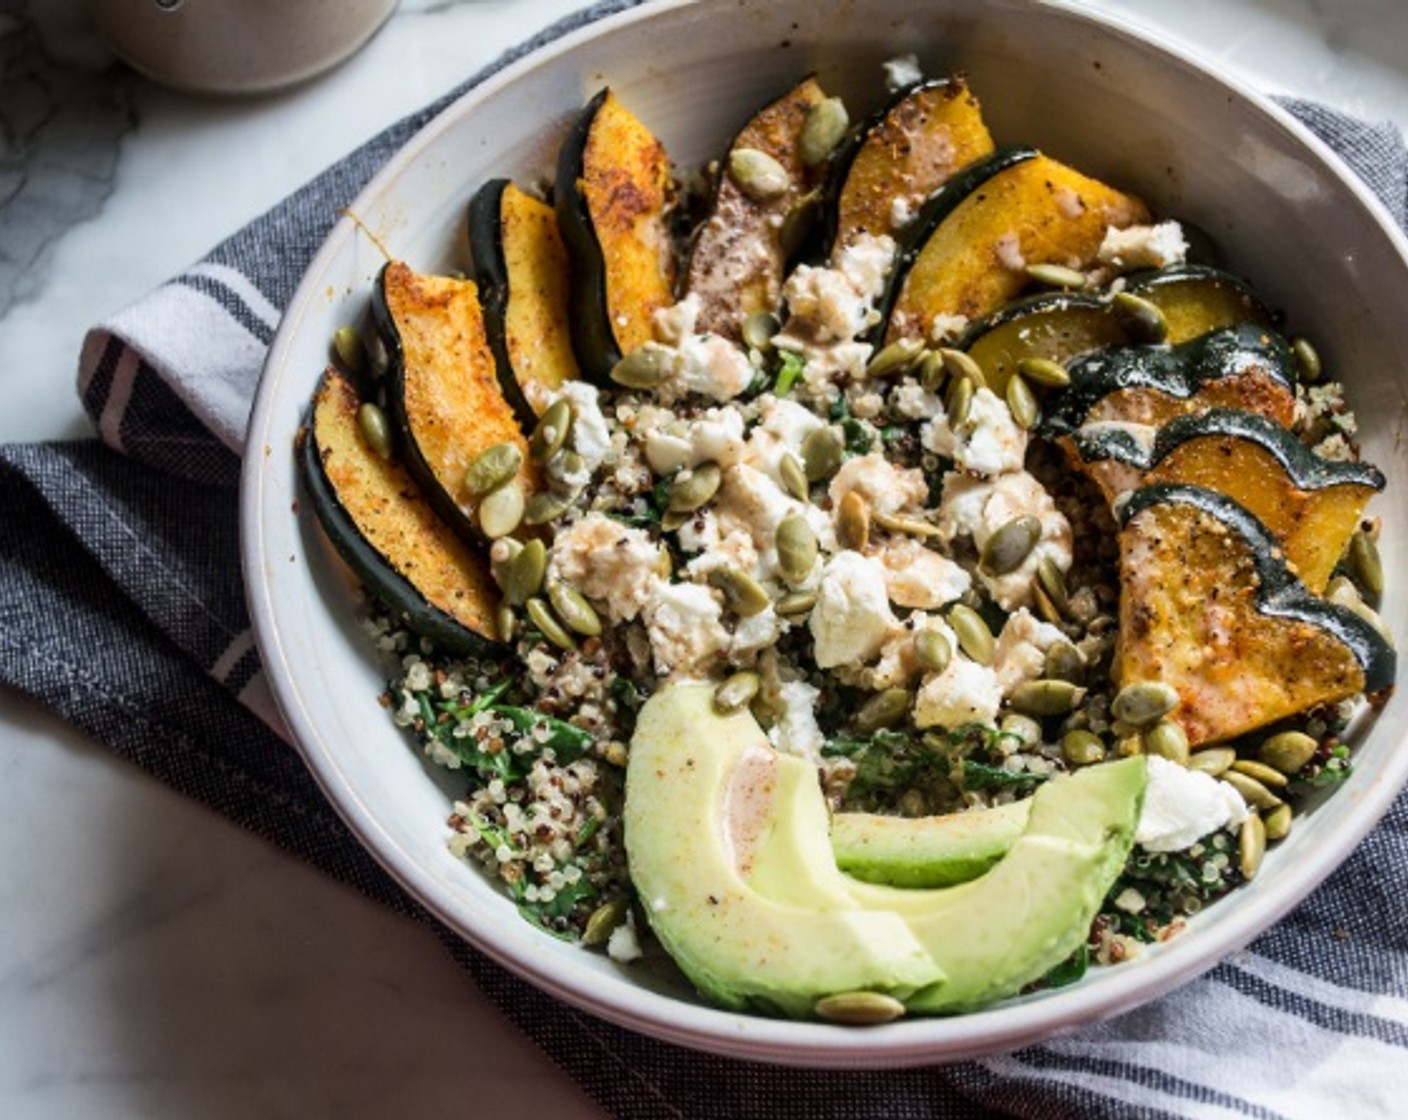 step 7 Once quinoa and squash have cooked, assemble power bowls, starting with a layer of the quinoa and spinach mixture, then add Acorn Squash, Pepitas (2 Tbsp), Goat Cheese (3 Tbsp), Avocado (1/2), and finally drizzle with Creamy Apple Cider Balsamic Vinaigrette.